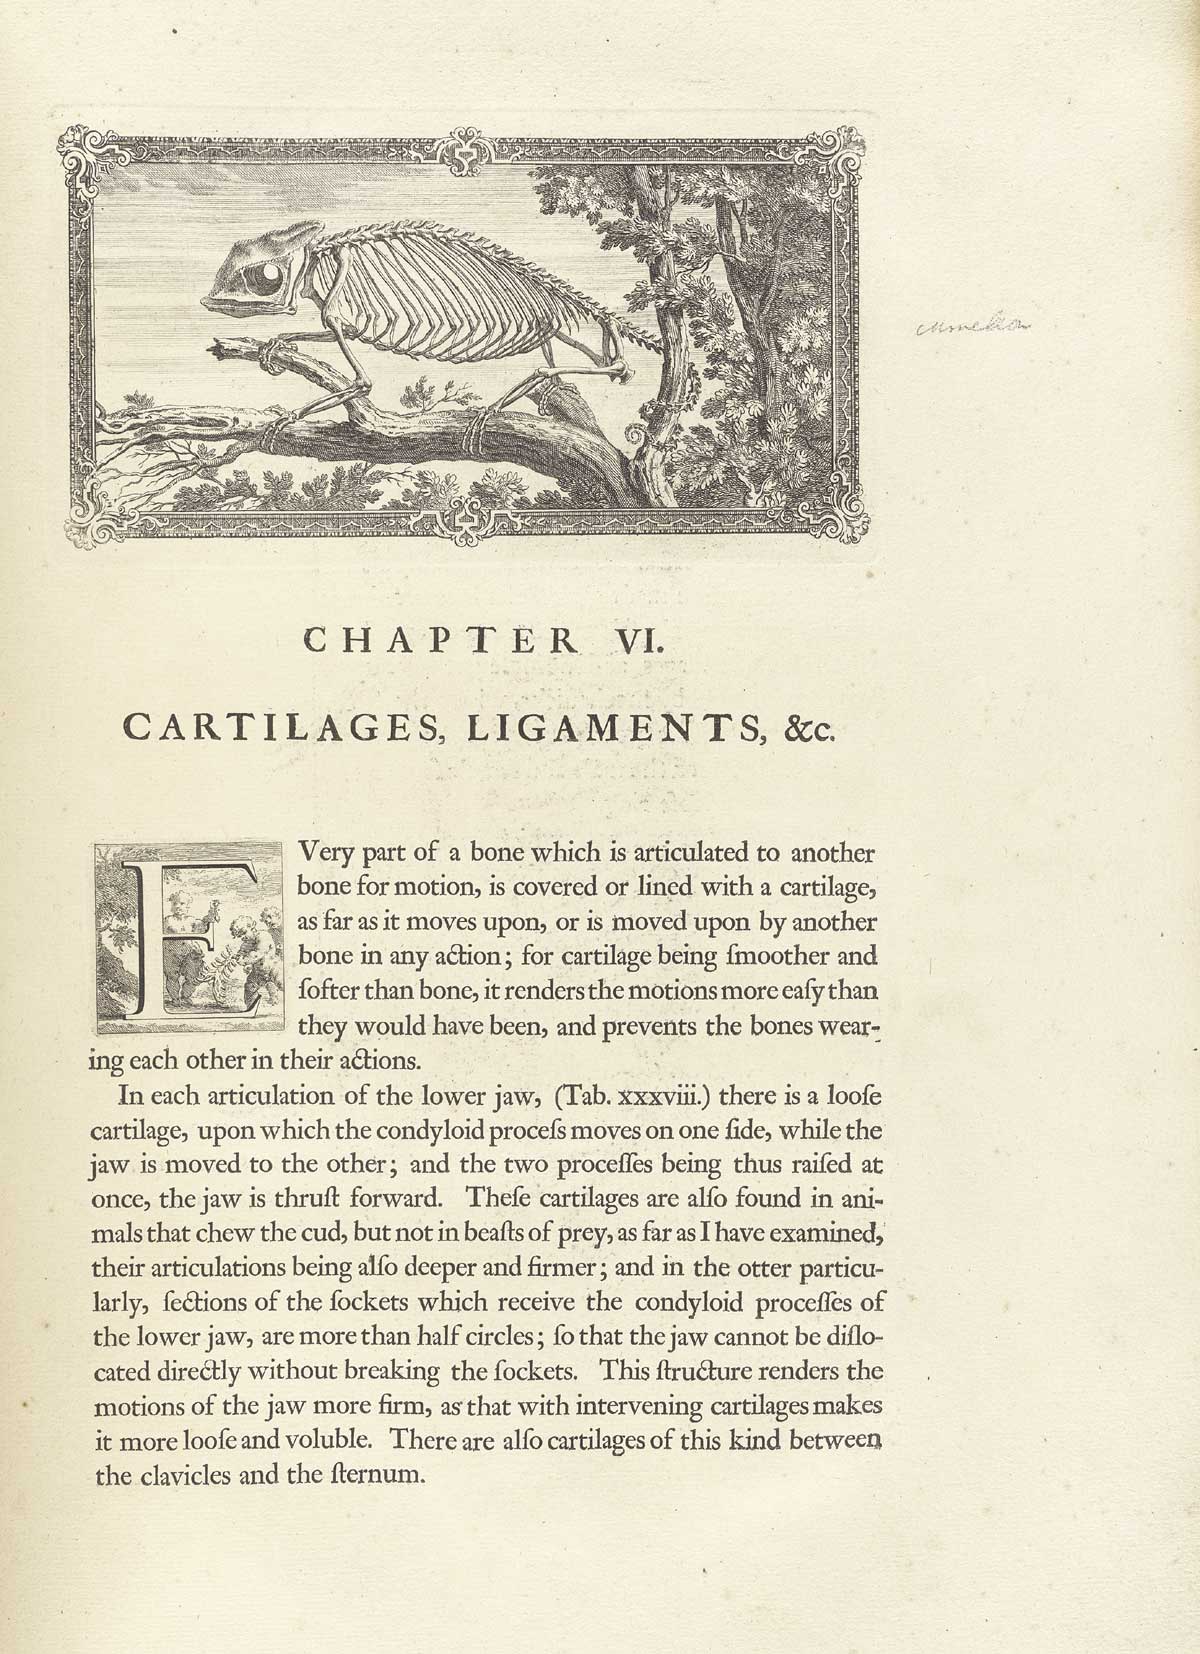 Typeset page of text with large engraved vignette at the top of the page showing the skeleton of a chameleon climbing on a tree branch facing to the left with its tail wrapped around a branch, from William Cheselden’s Osteographia, NLM Call no.: WZ 260 C499o 1733.